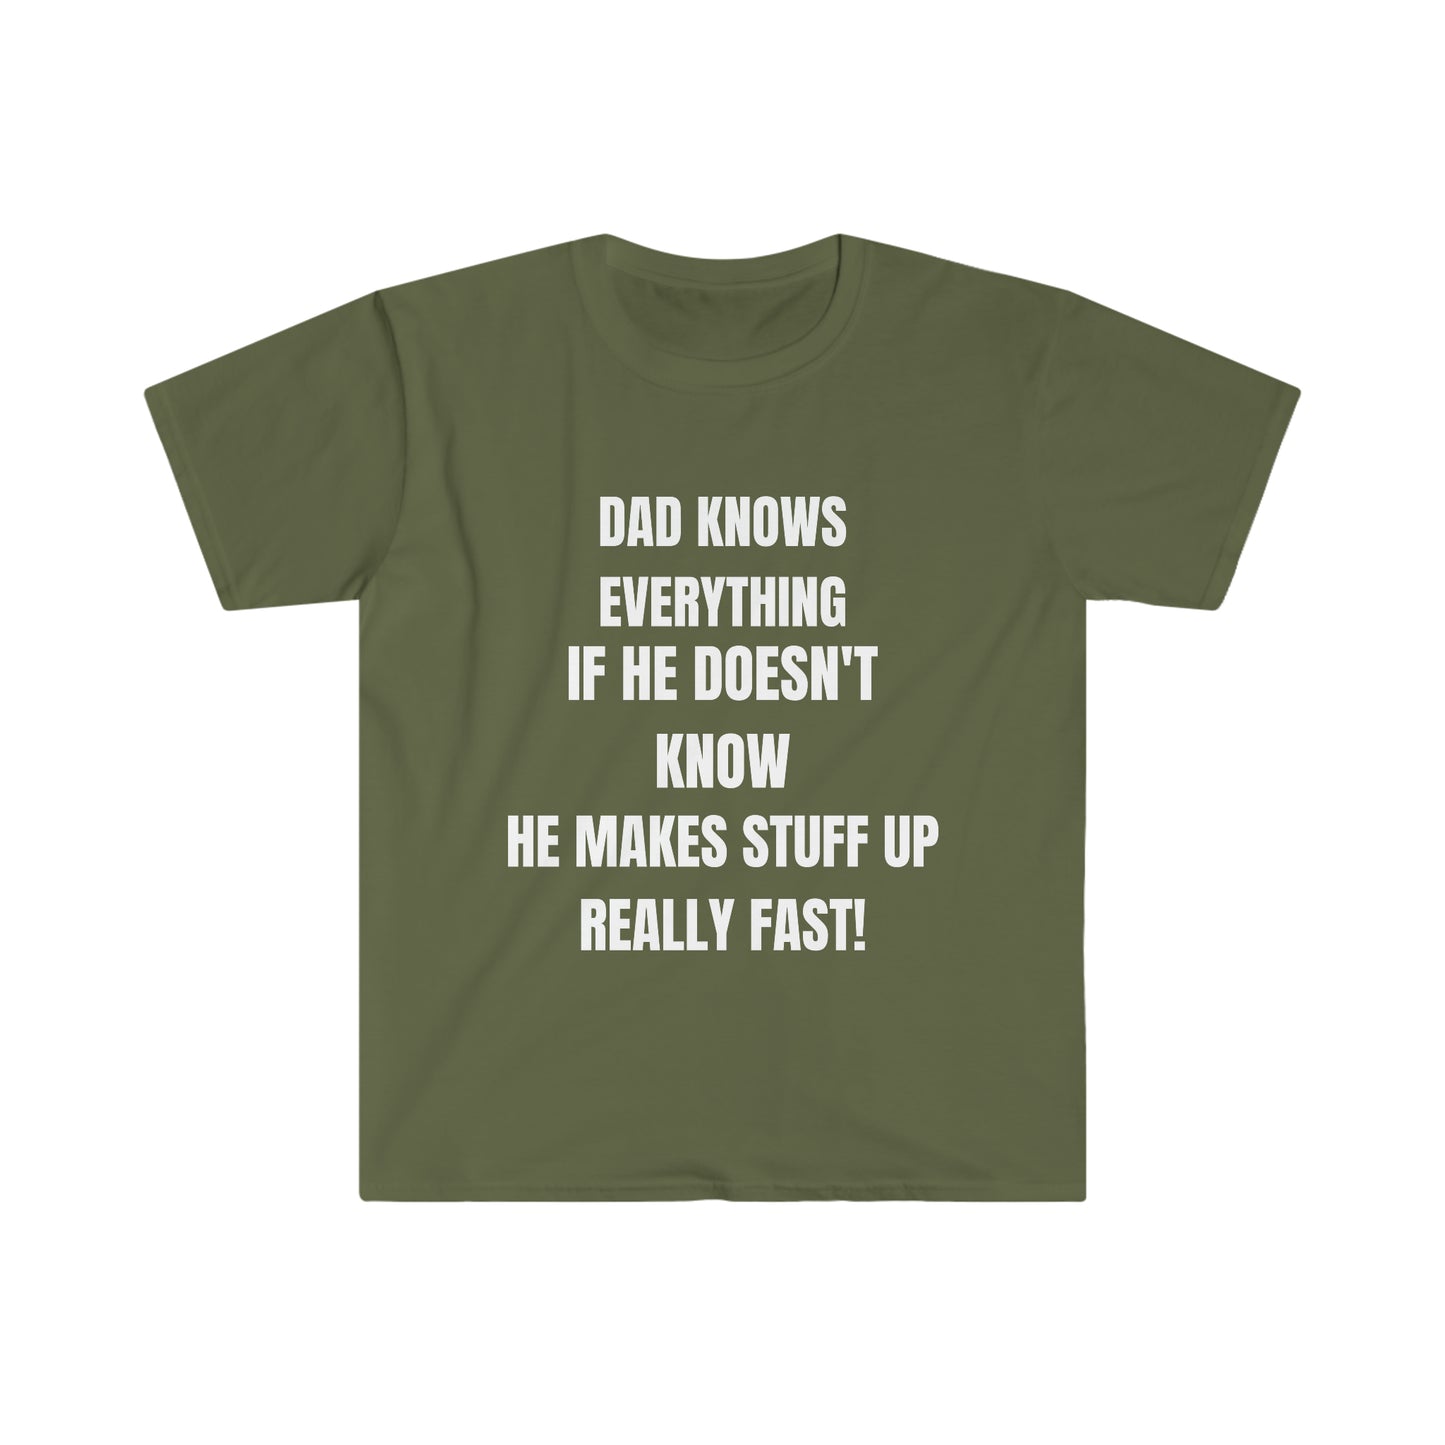 Unisex Jersey Tee: Short Sleeve, "Dad Knows Everything" Humorous Design